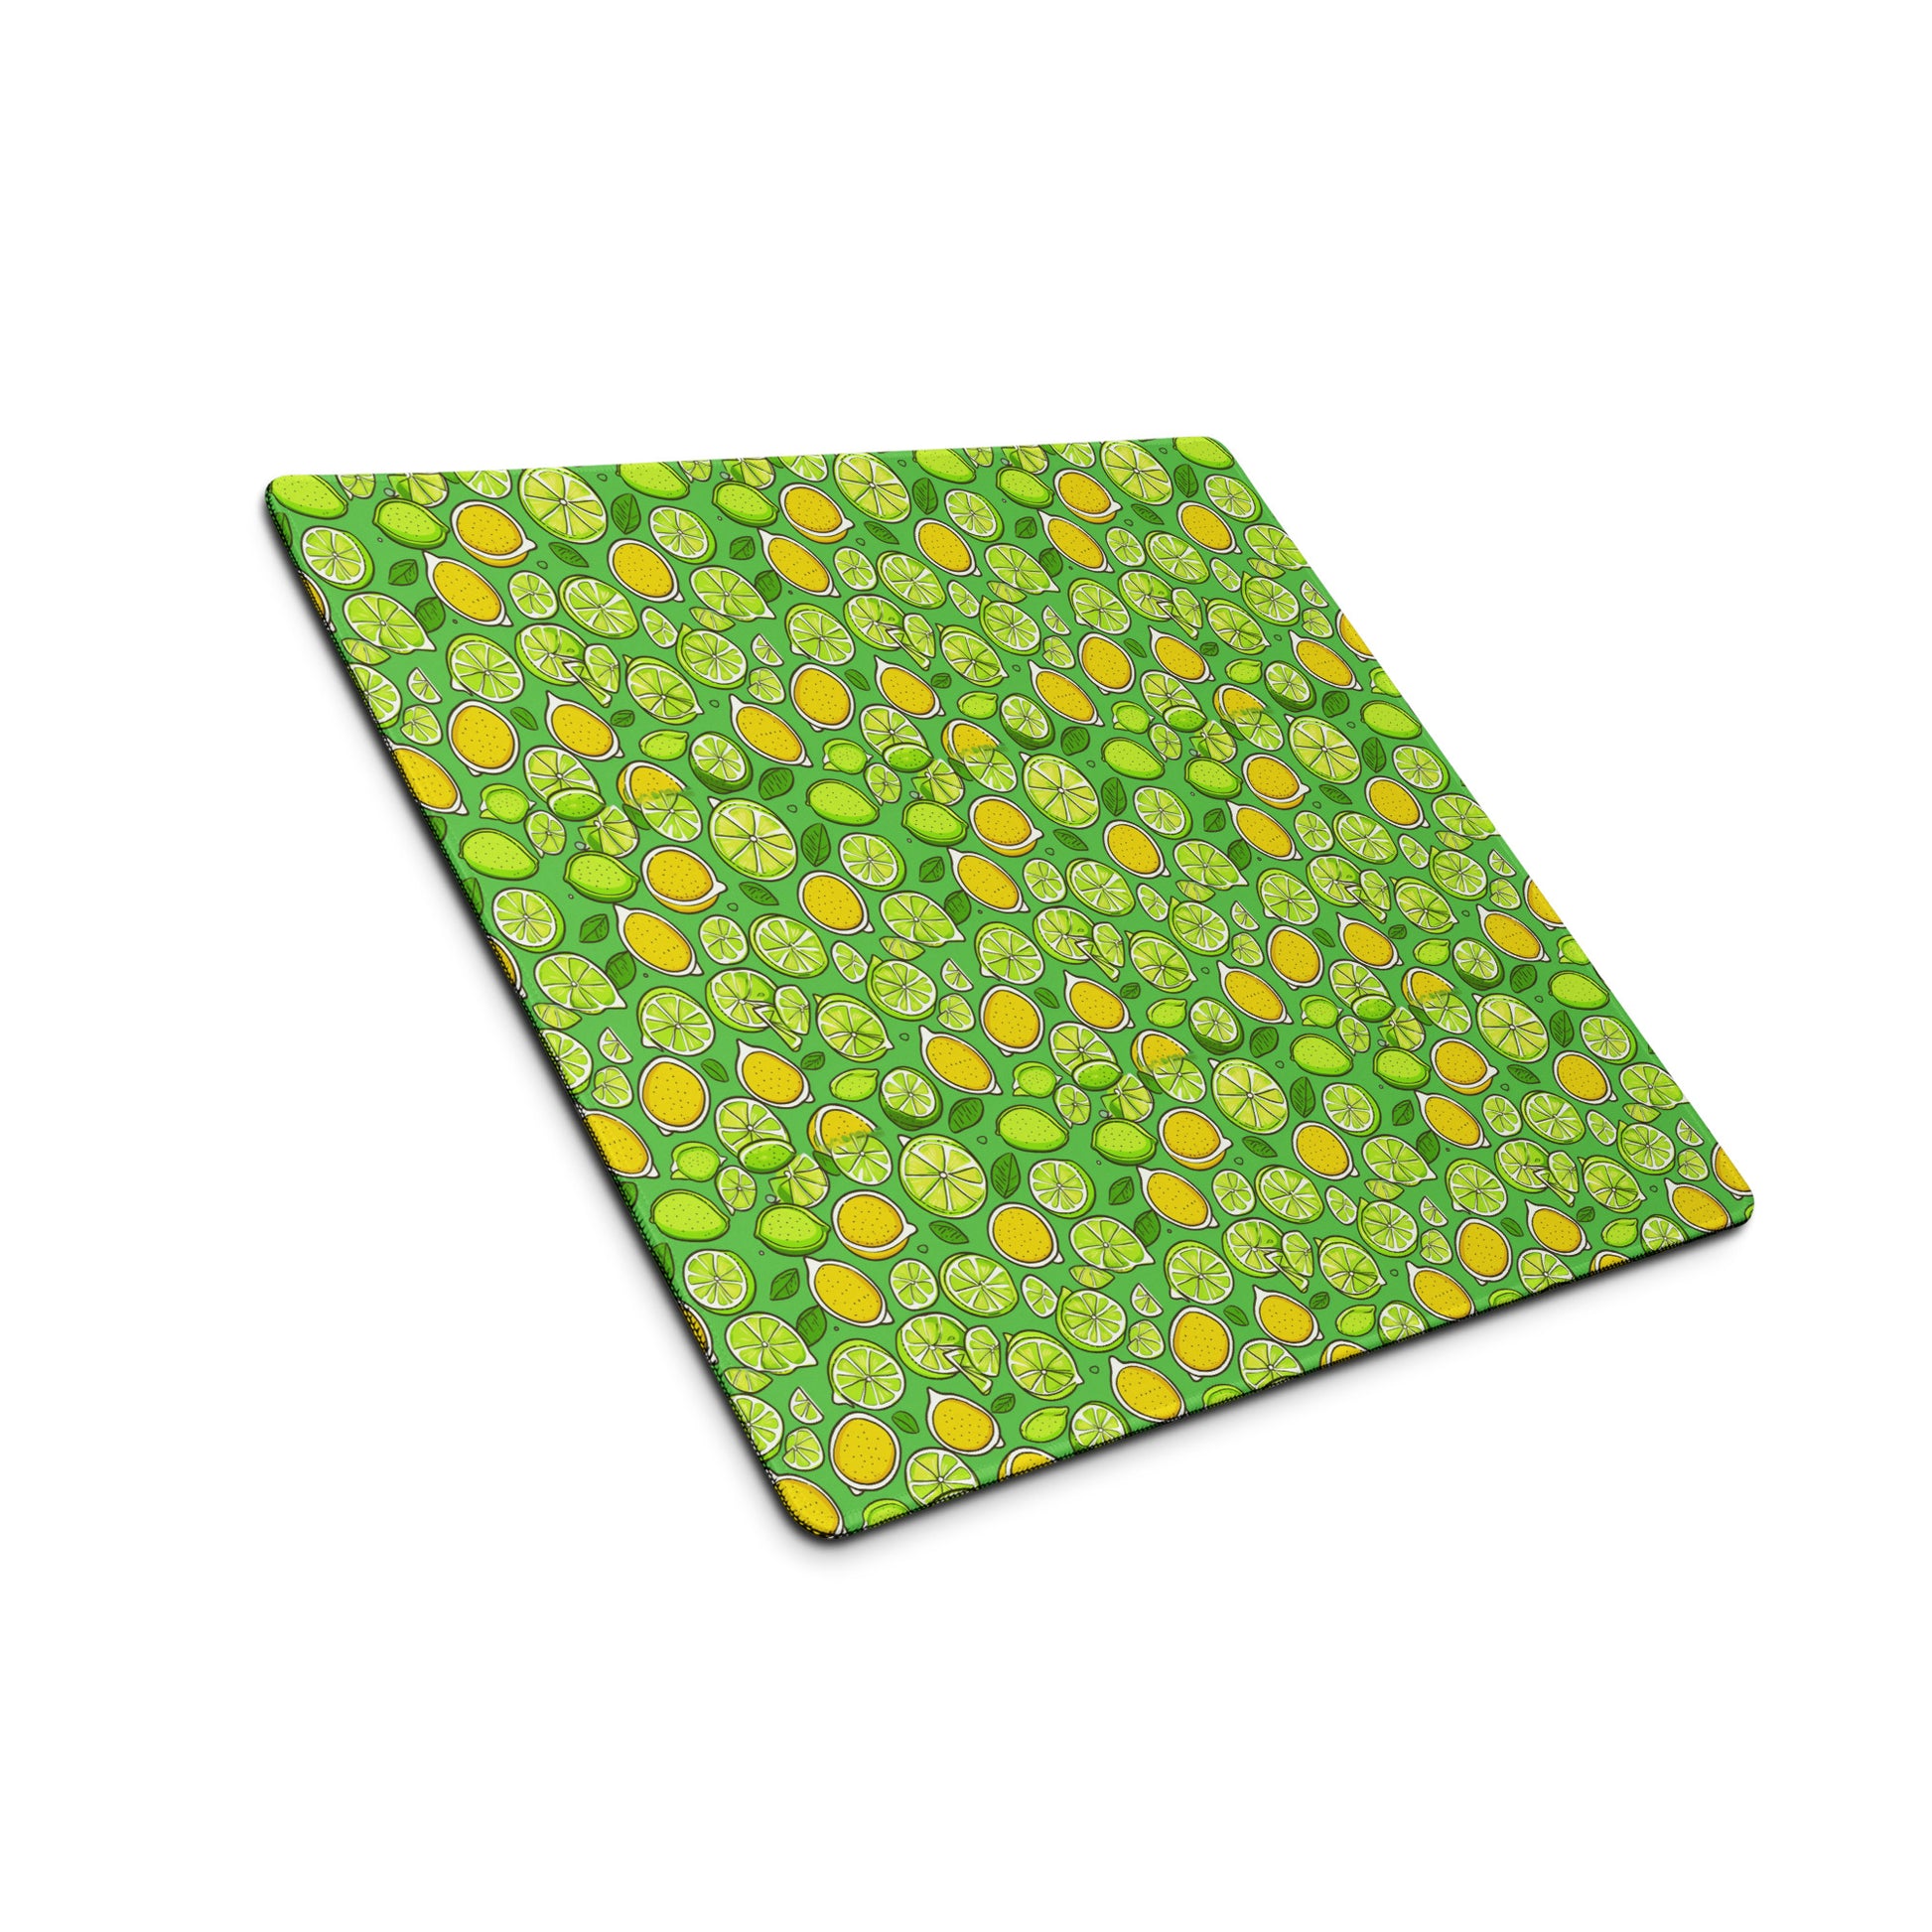 An 18" x 16" gaming desk pad with lemons and limes on a green background sitting at an angle.